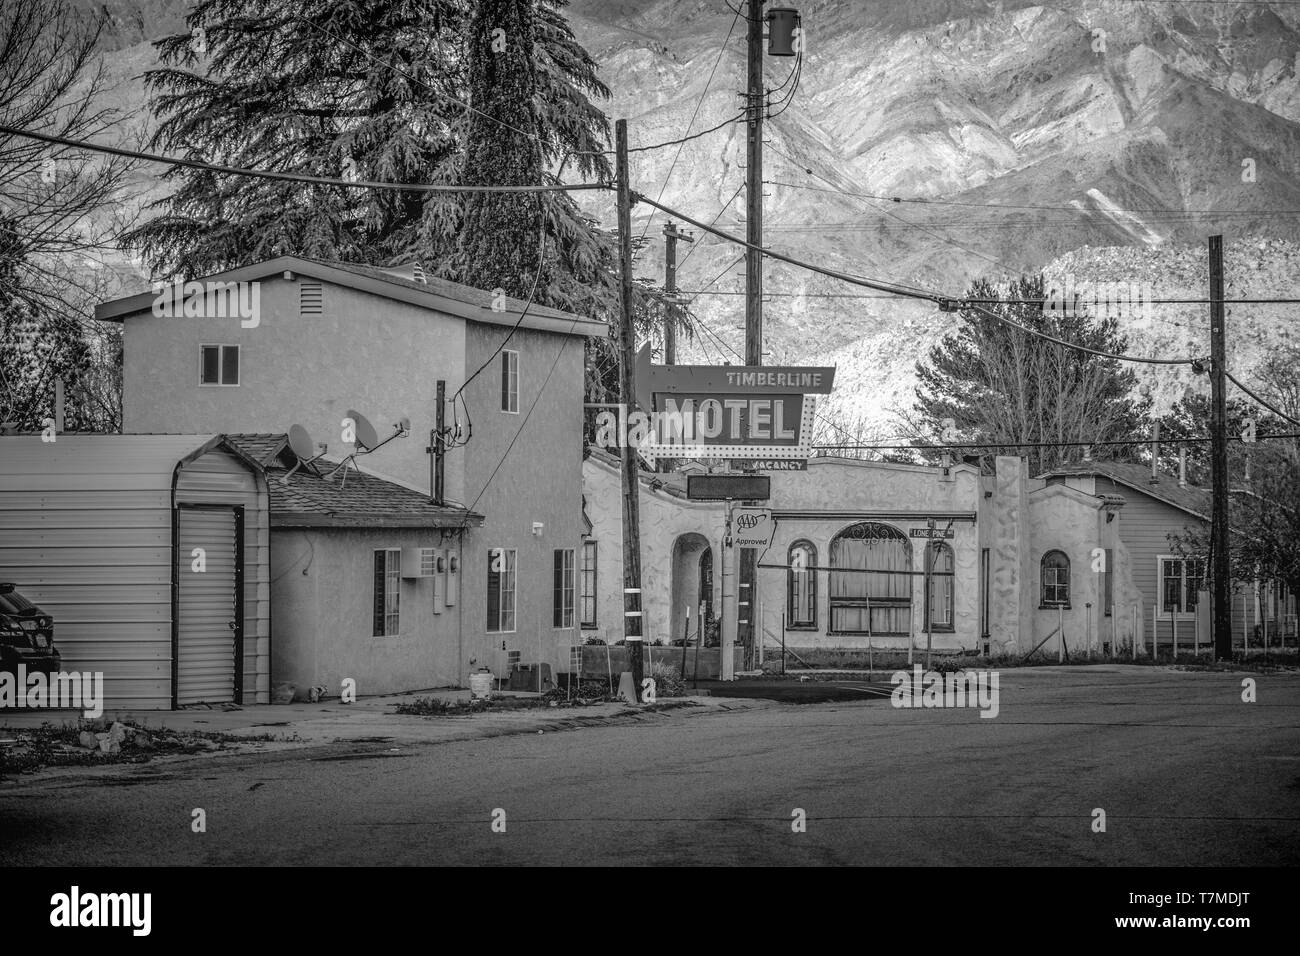 Timberline Motel in the historic village of Lone Pine - LONE PINE CA, UNITED STATES OF AMERICA - MARCH 29, 2019 Stock Photo